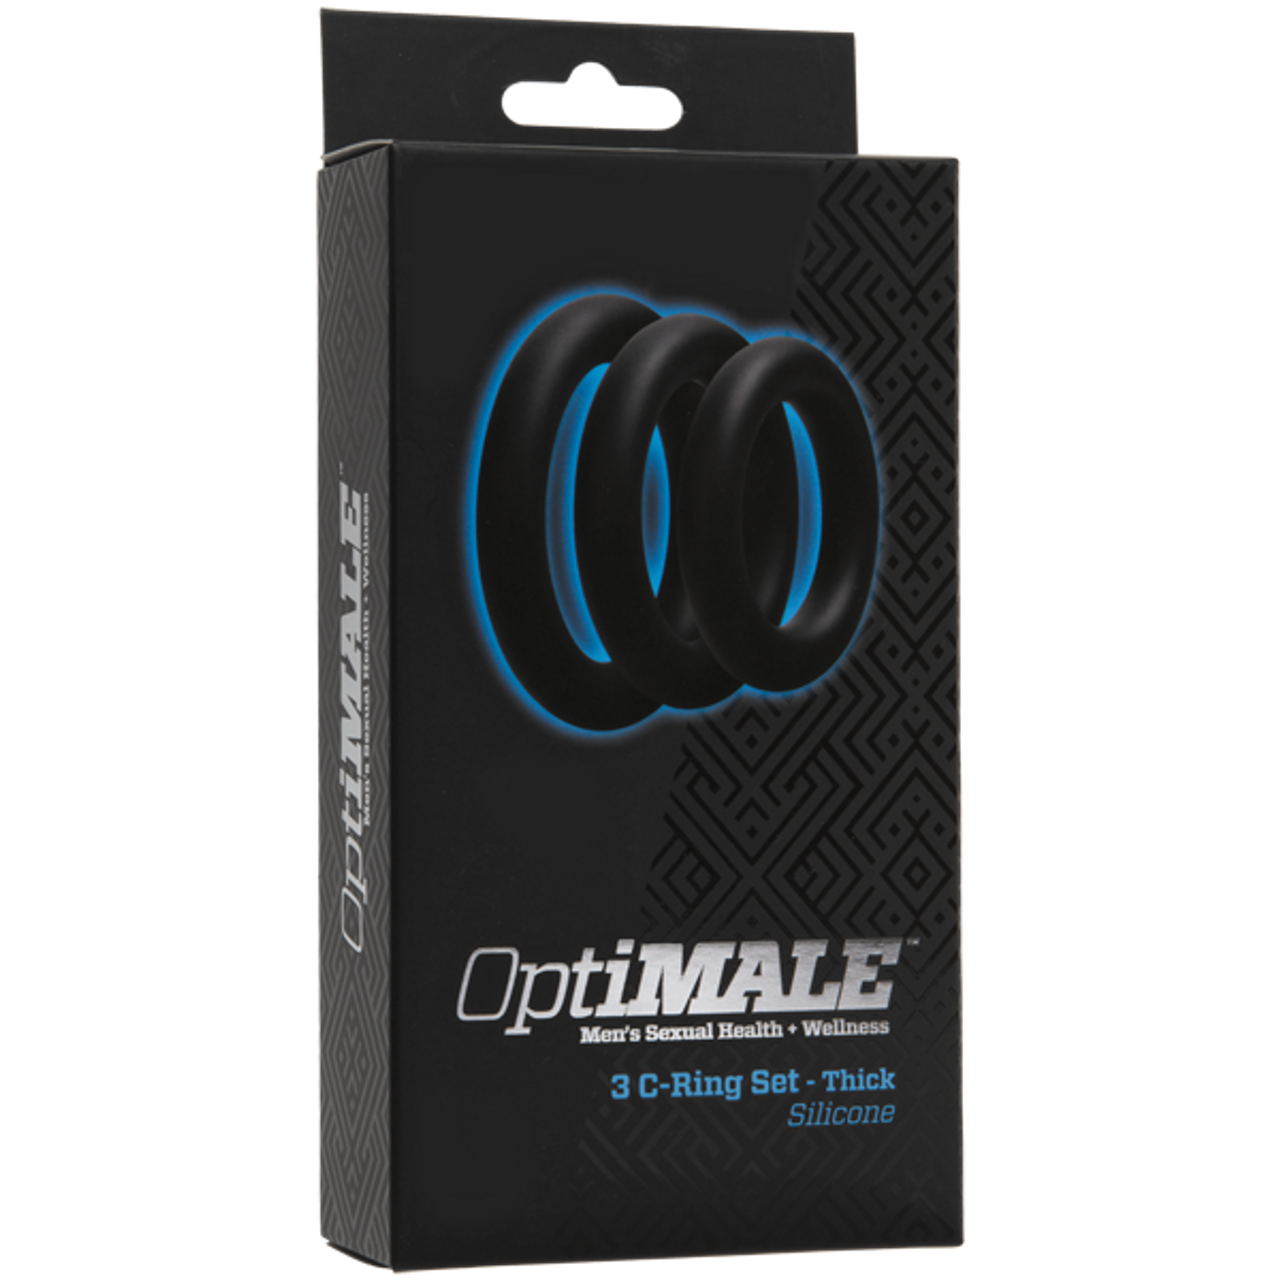 Optimale Thick 3 C Ring Set Silicone Black Dallas Novelty Online Sex Toys Retailer